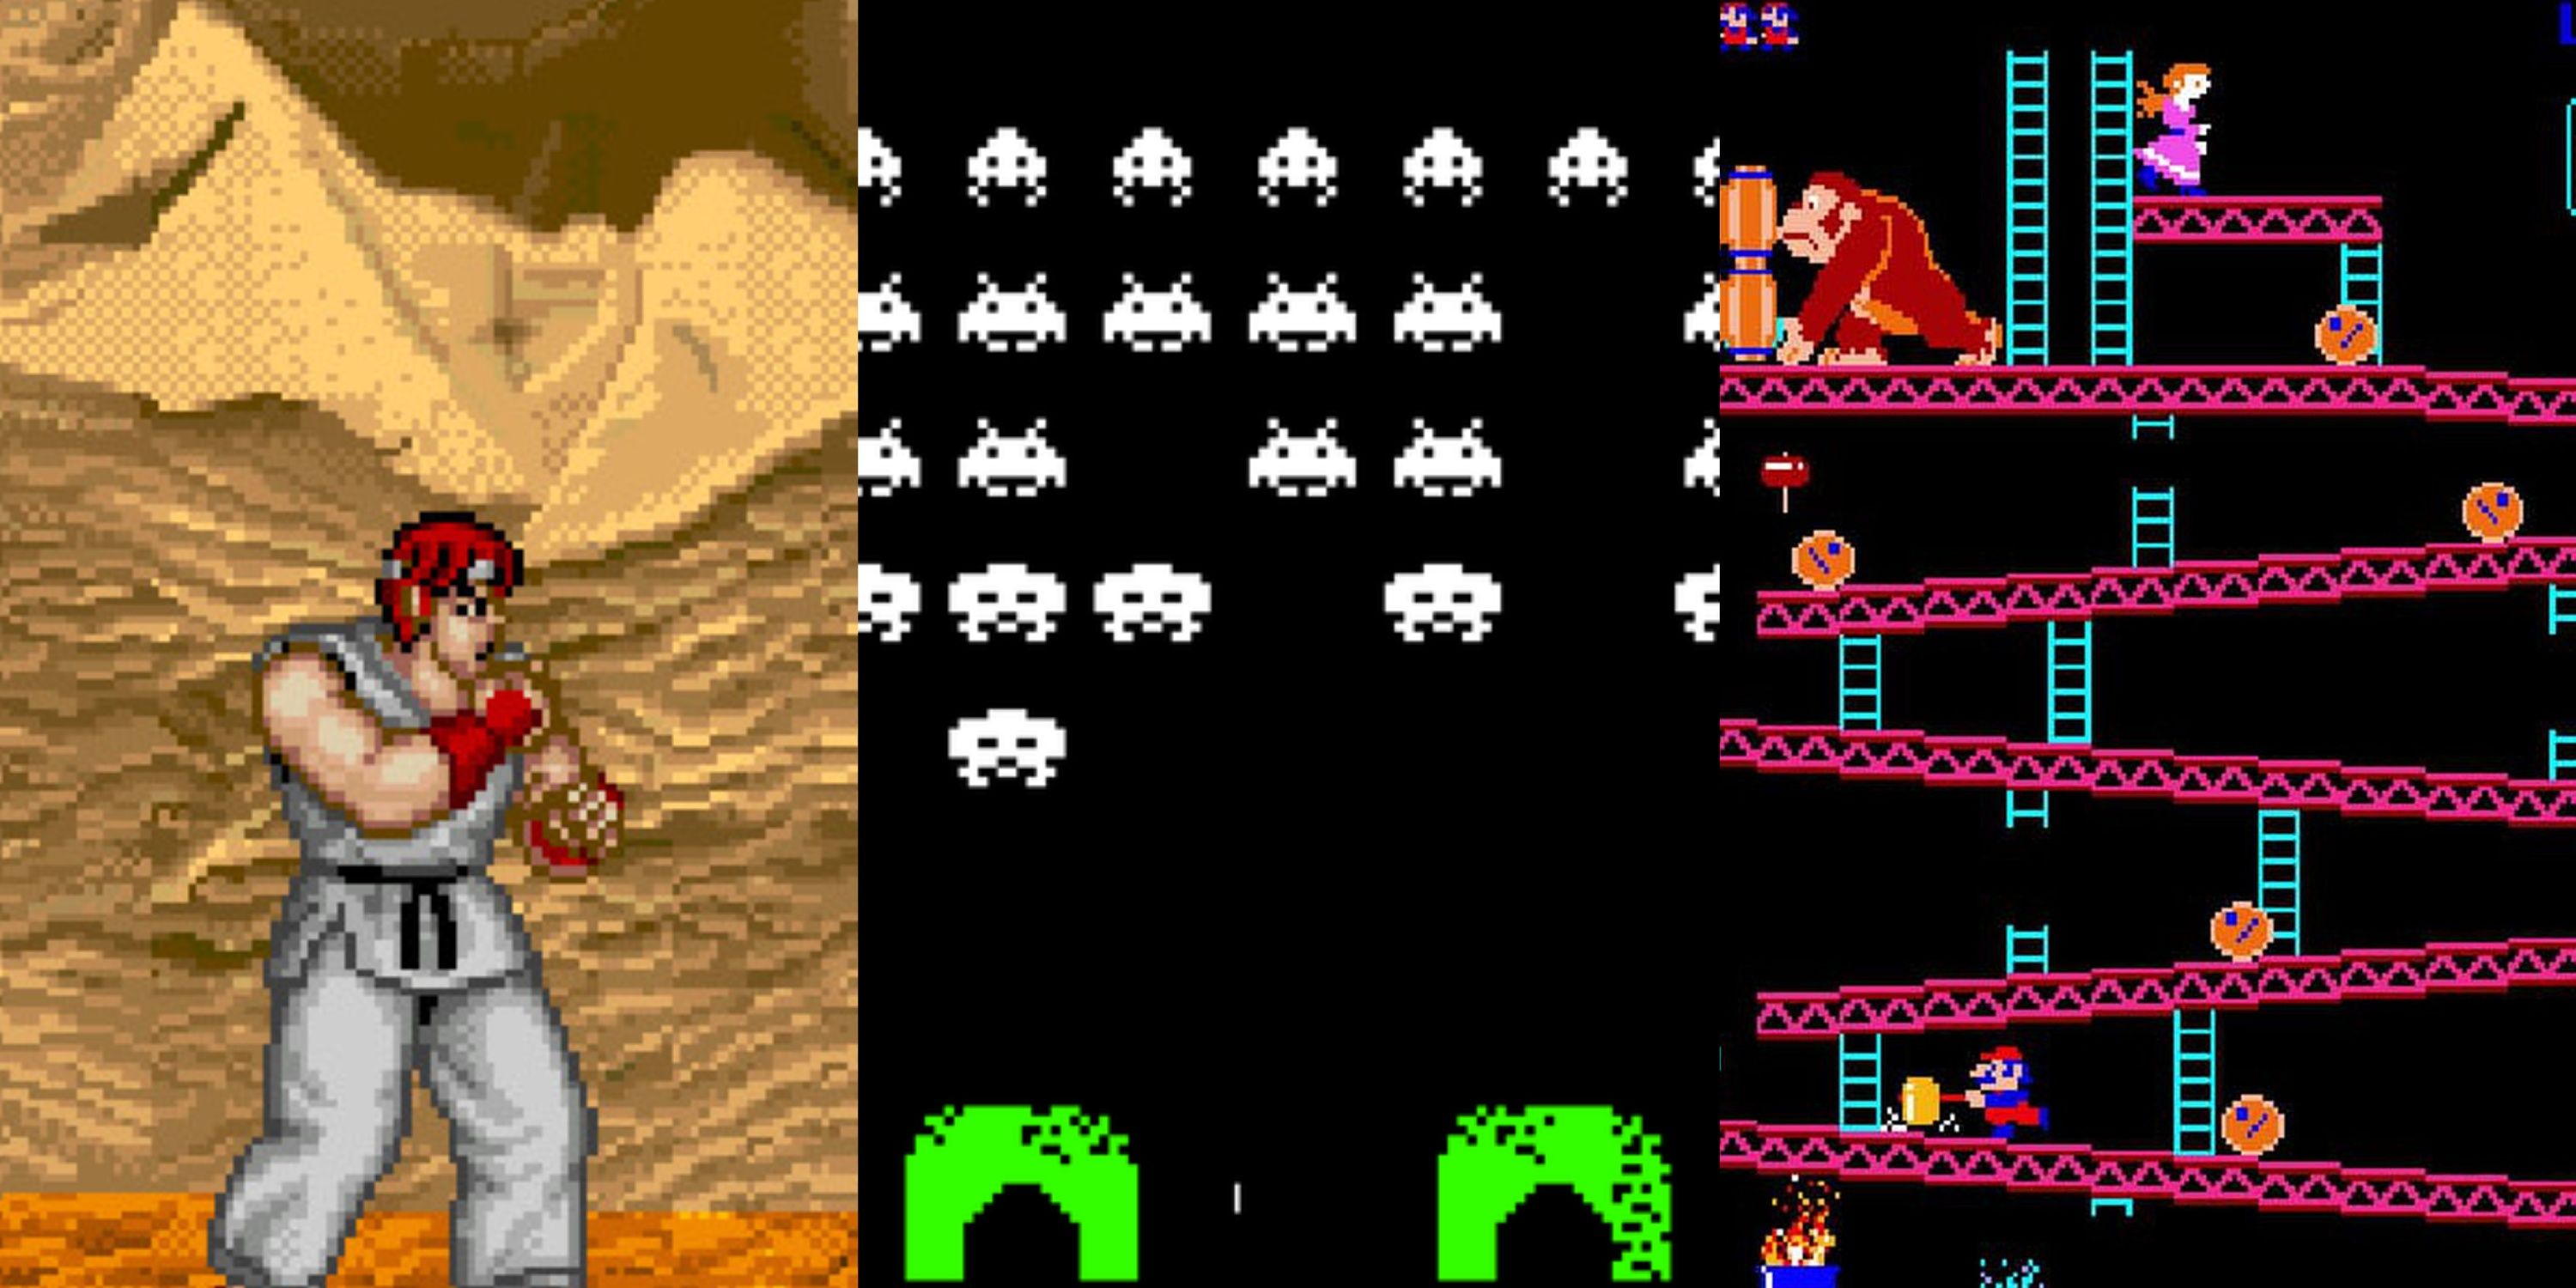 Split image of Street Fighter, Space Invaders, and Donkey Kong gameplay.